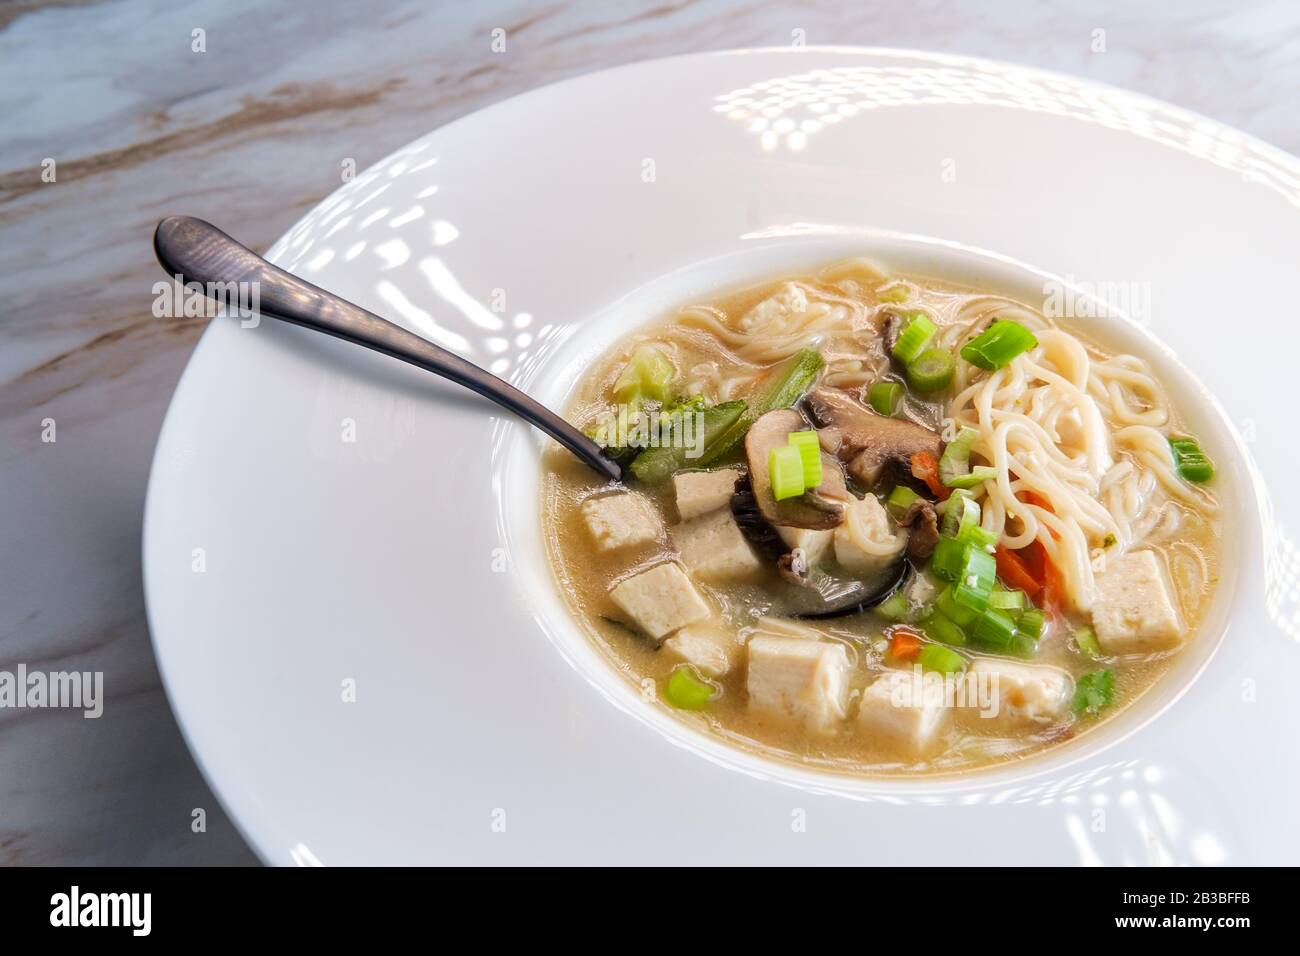 Bowl of loaded Japanese miso soup with noodles tofu julienned carrots and zucchini Stock Photo